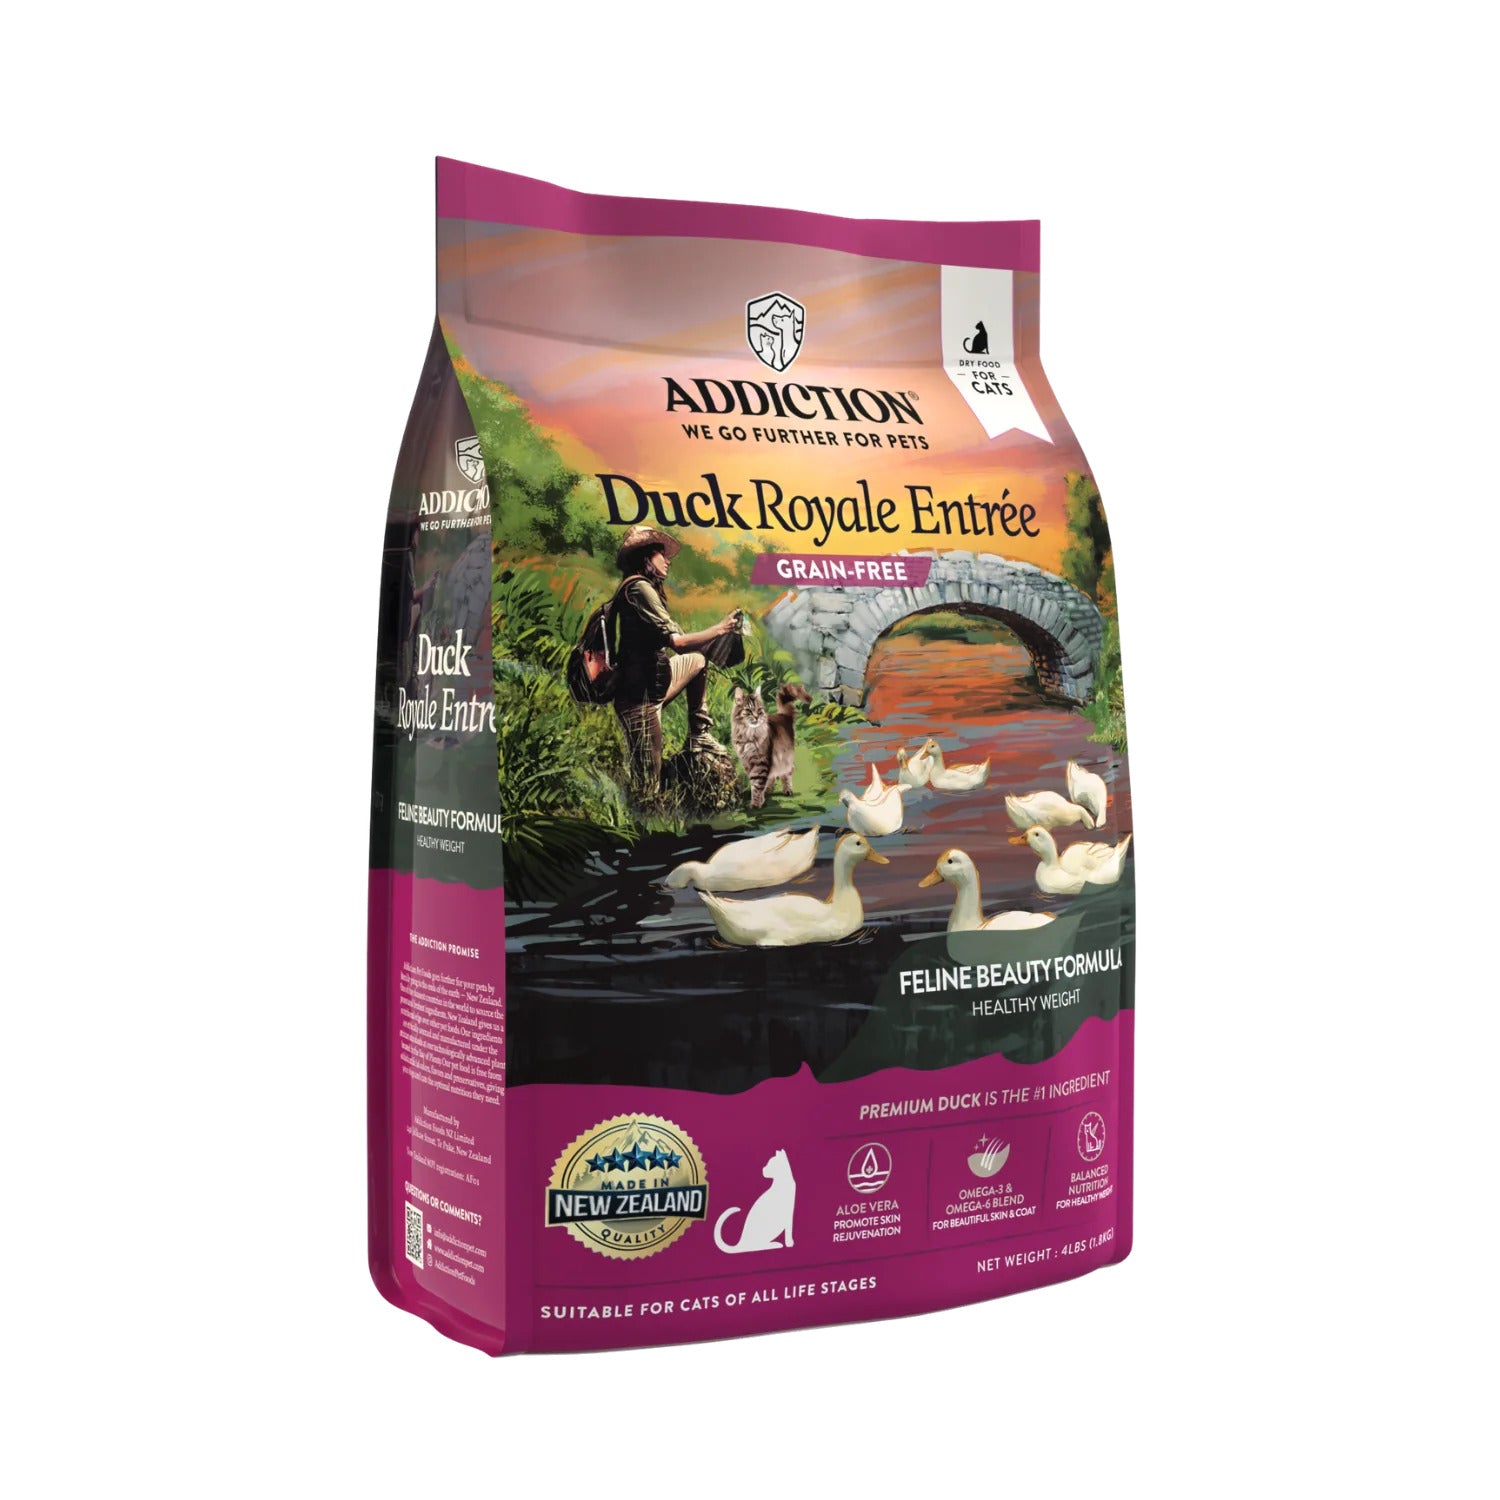 Addiction Biscuits Addiction Duck Royale Grain Free Cat Food 1.8 kg